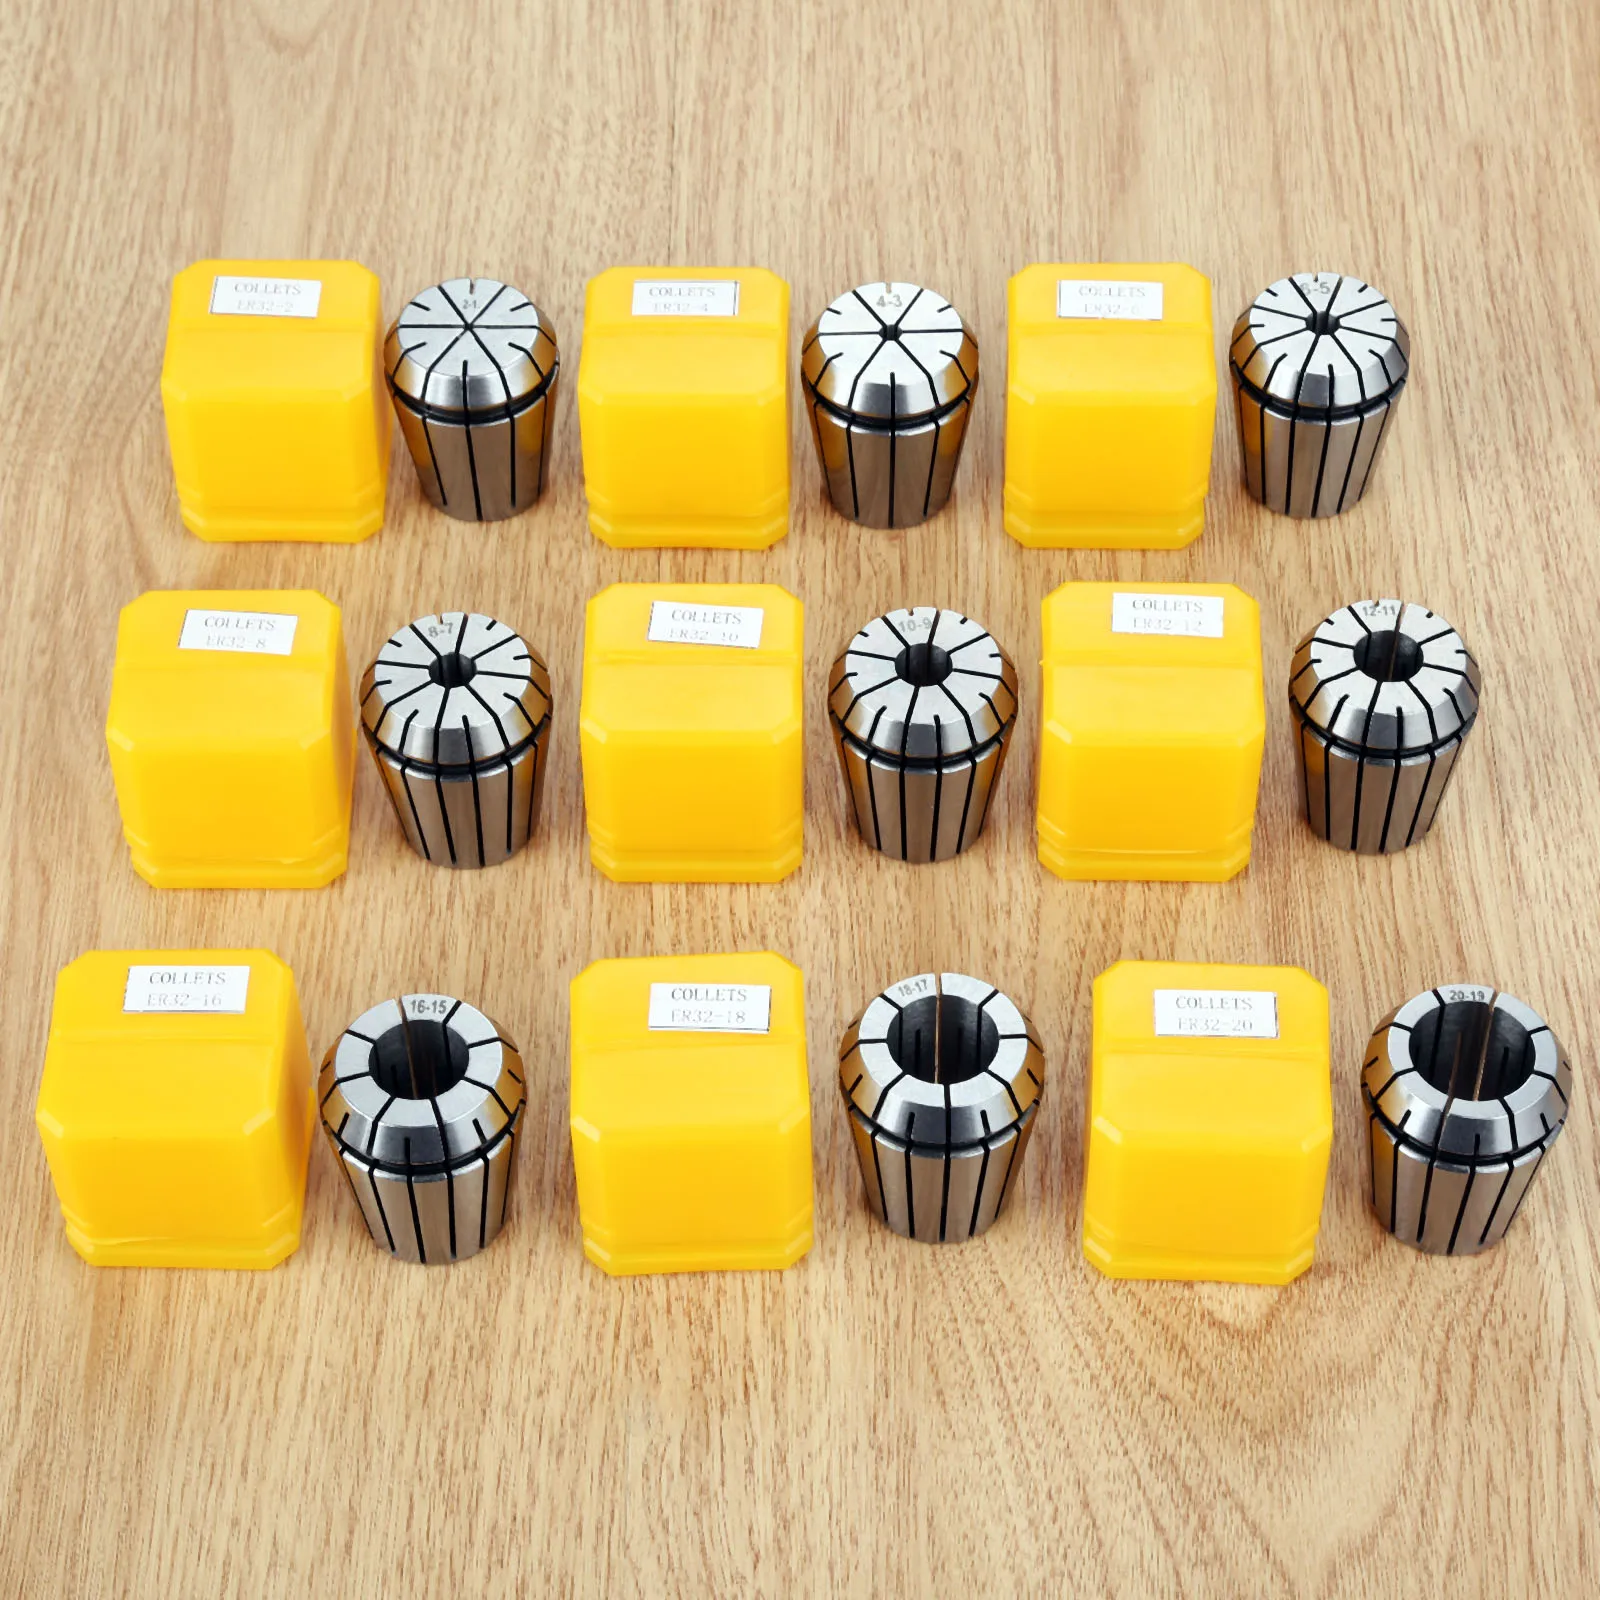 9Pcs/Lot 2/4/6/8/10/12/16/18/20mm Collets For CNC Milling Lathe Tool And Work-holding Engraving Machine Durable Tools Part